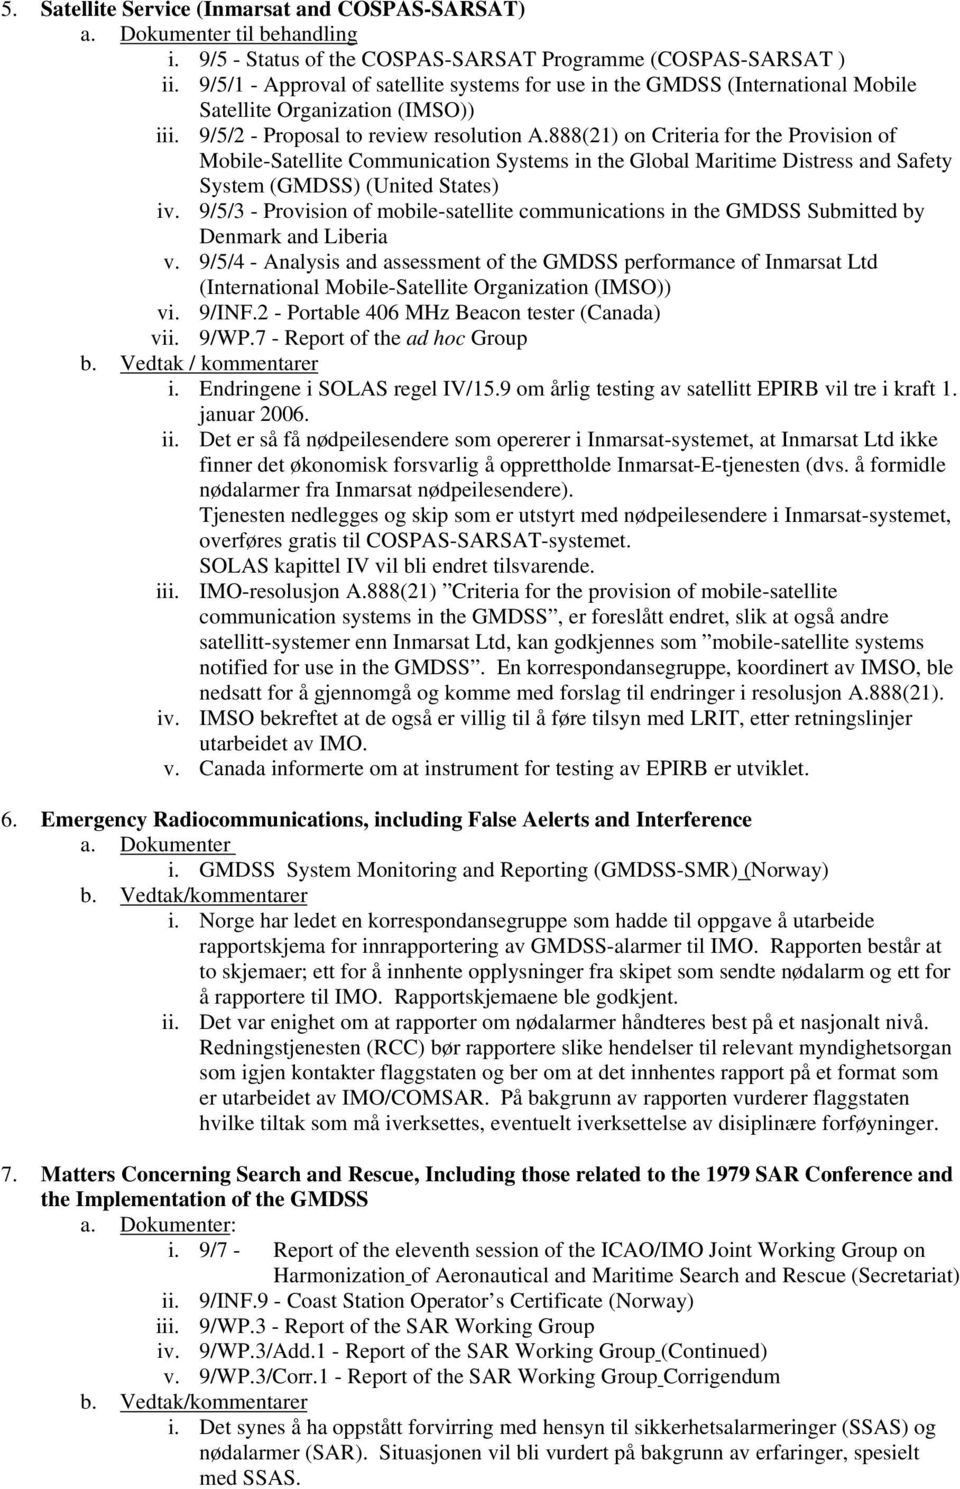 888(21) on Criteria for the Provision of Mobile-Satellite Communication Systems in the Global Maritime Distress and Safety System (GMDSS) (United States) iv.